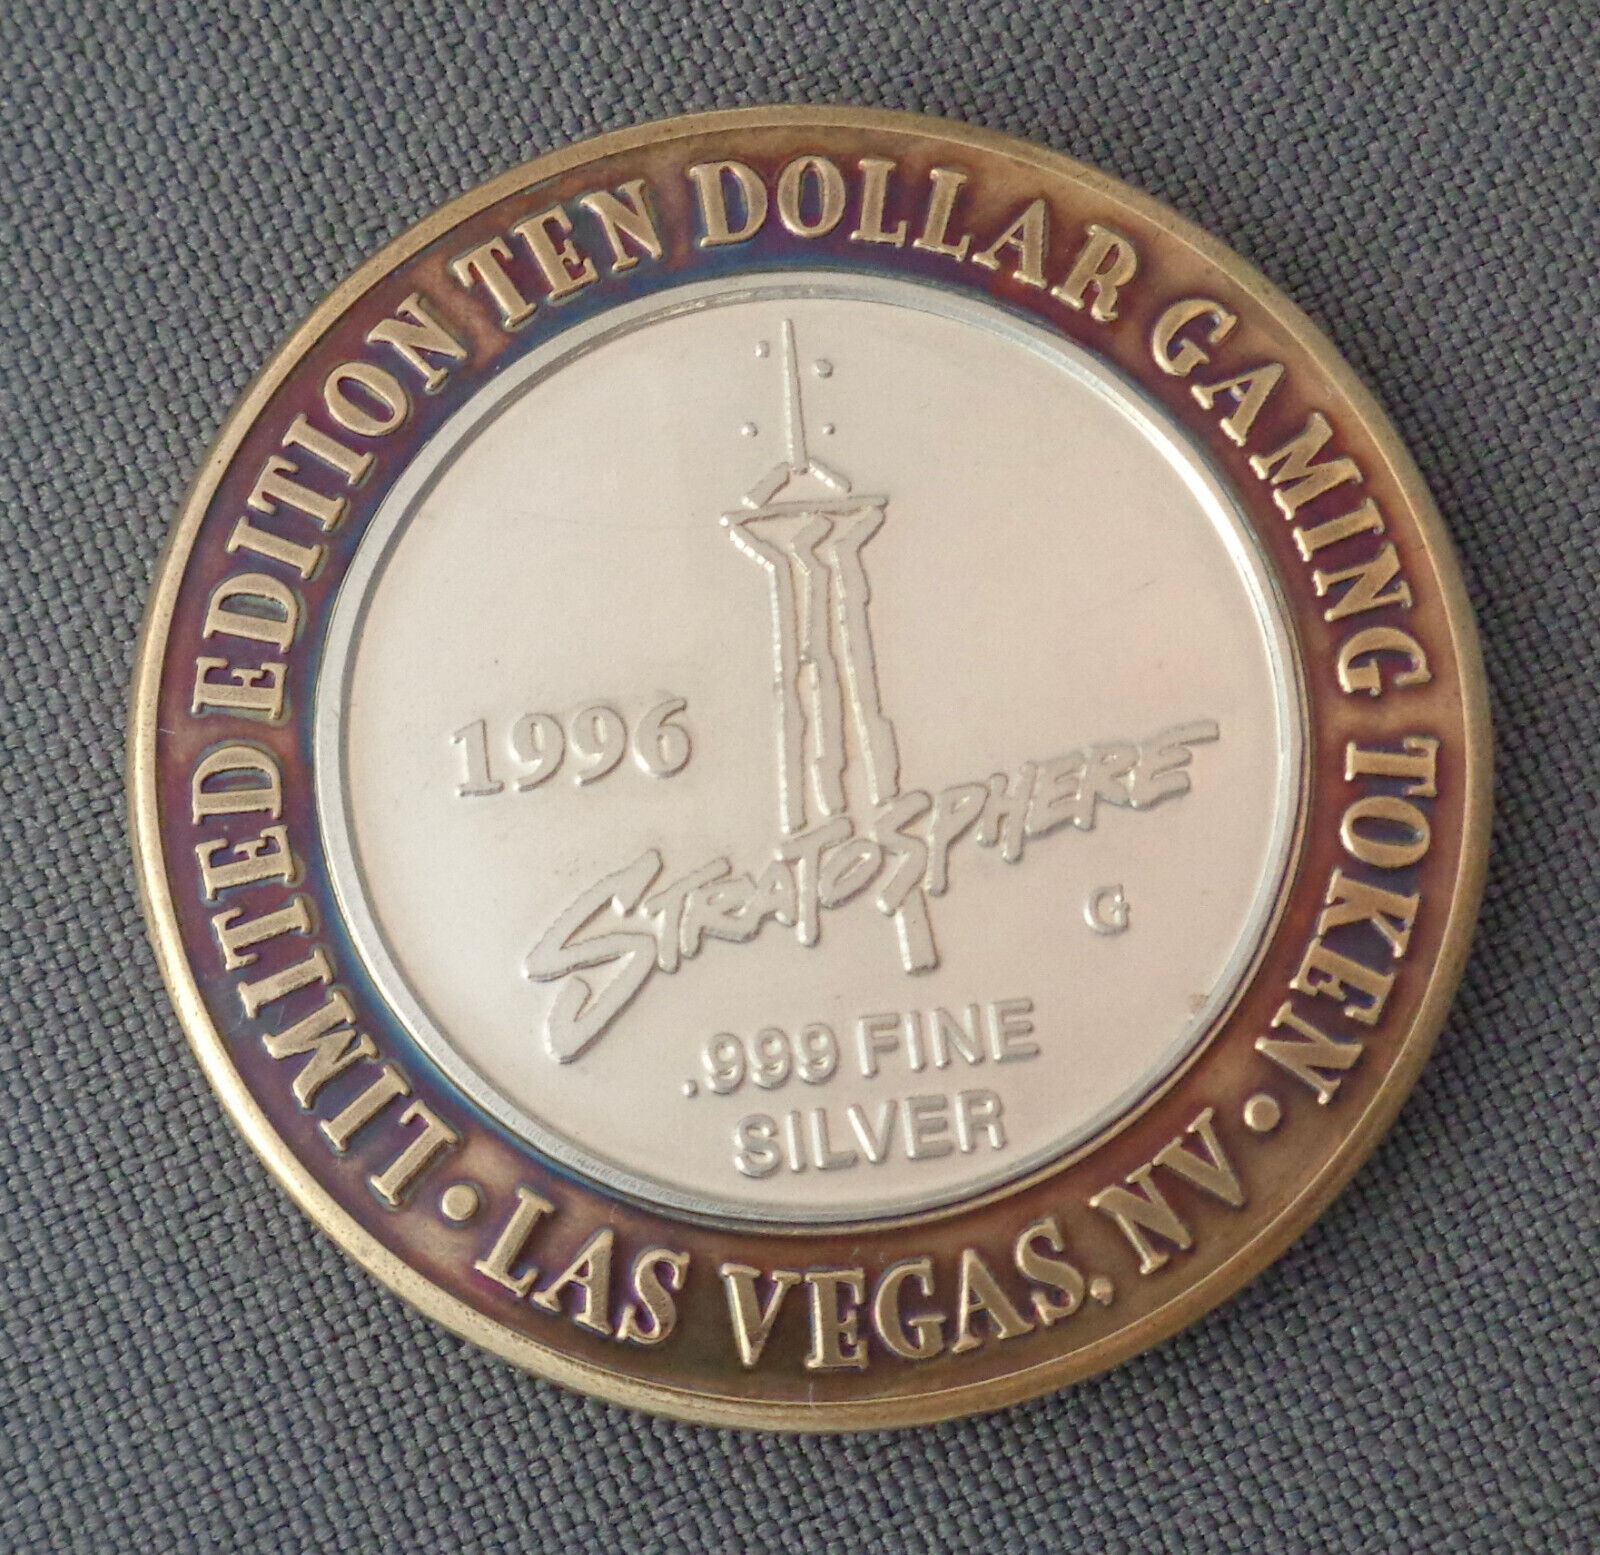 1996 Stratosphere 999 Fine Silver $10 Gaming Token Top of the World Las Vegas NV - $44.99